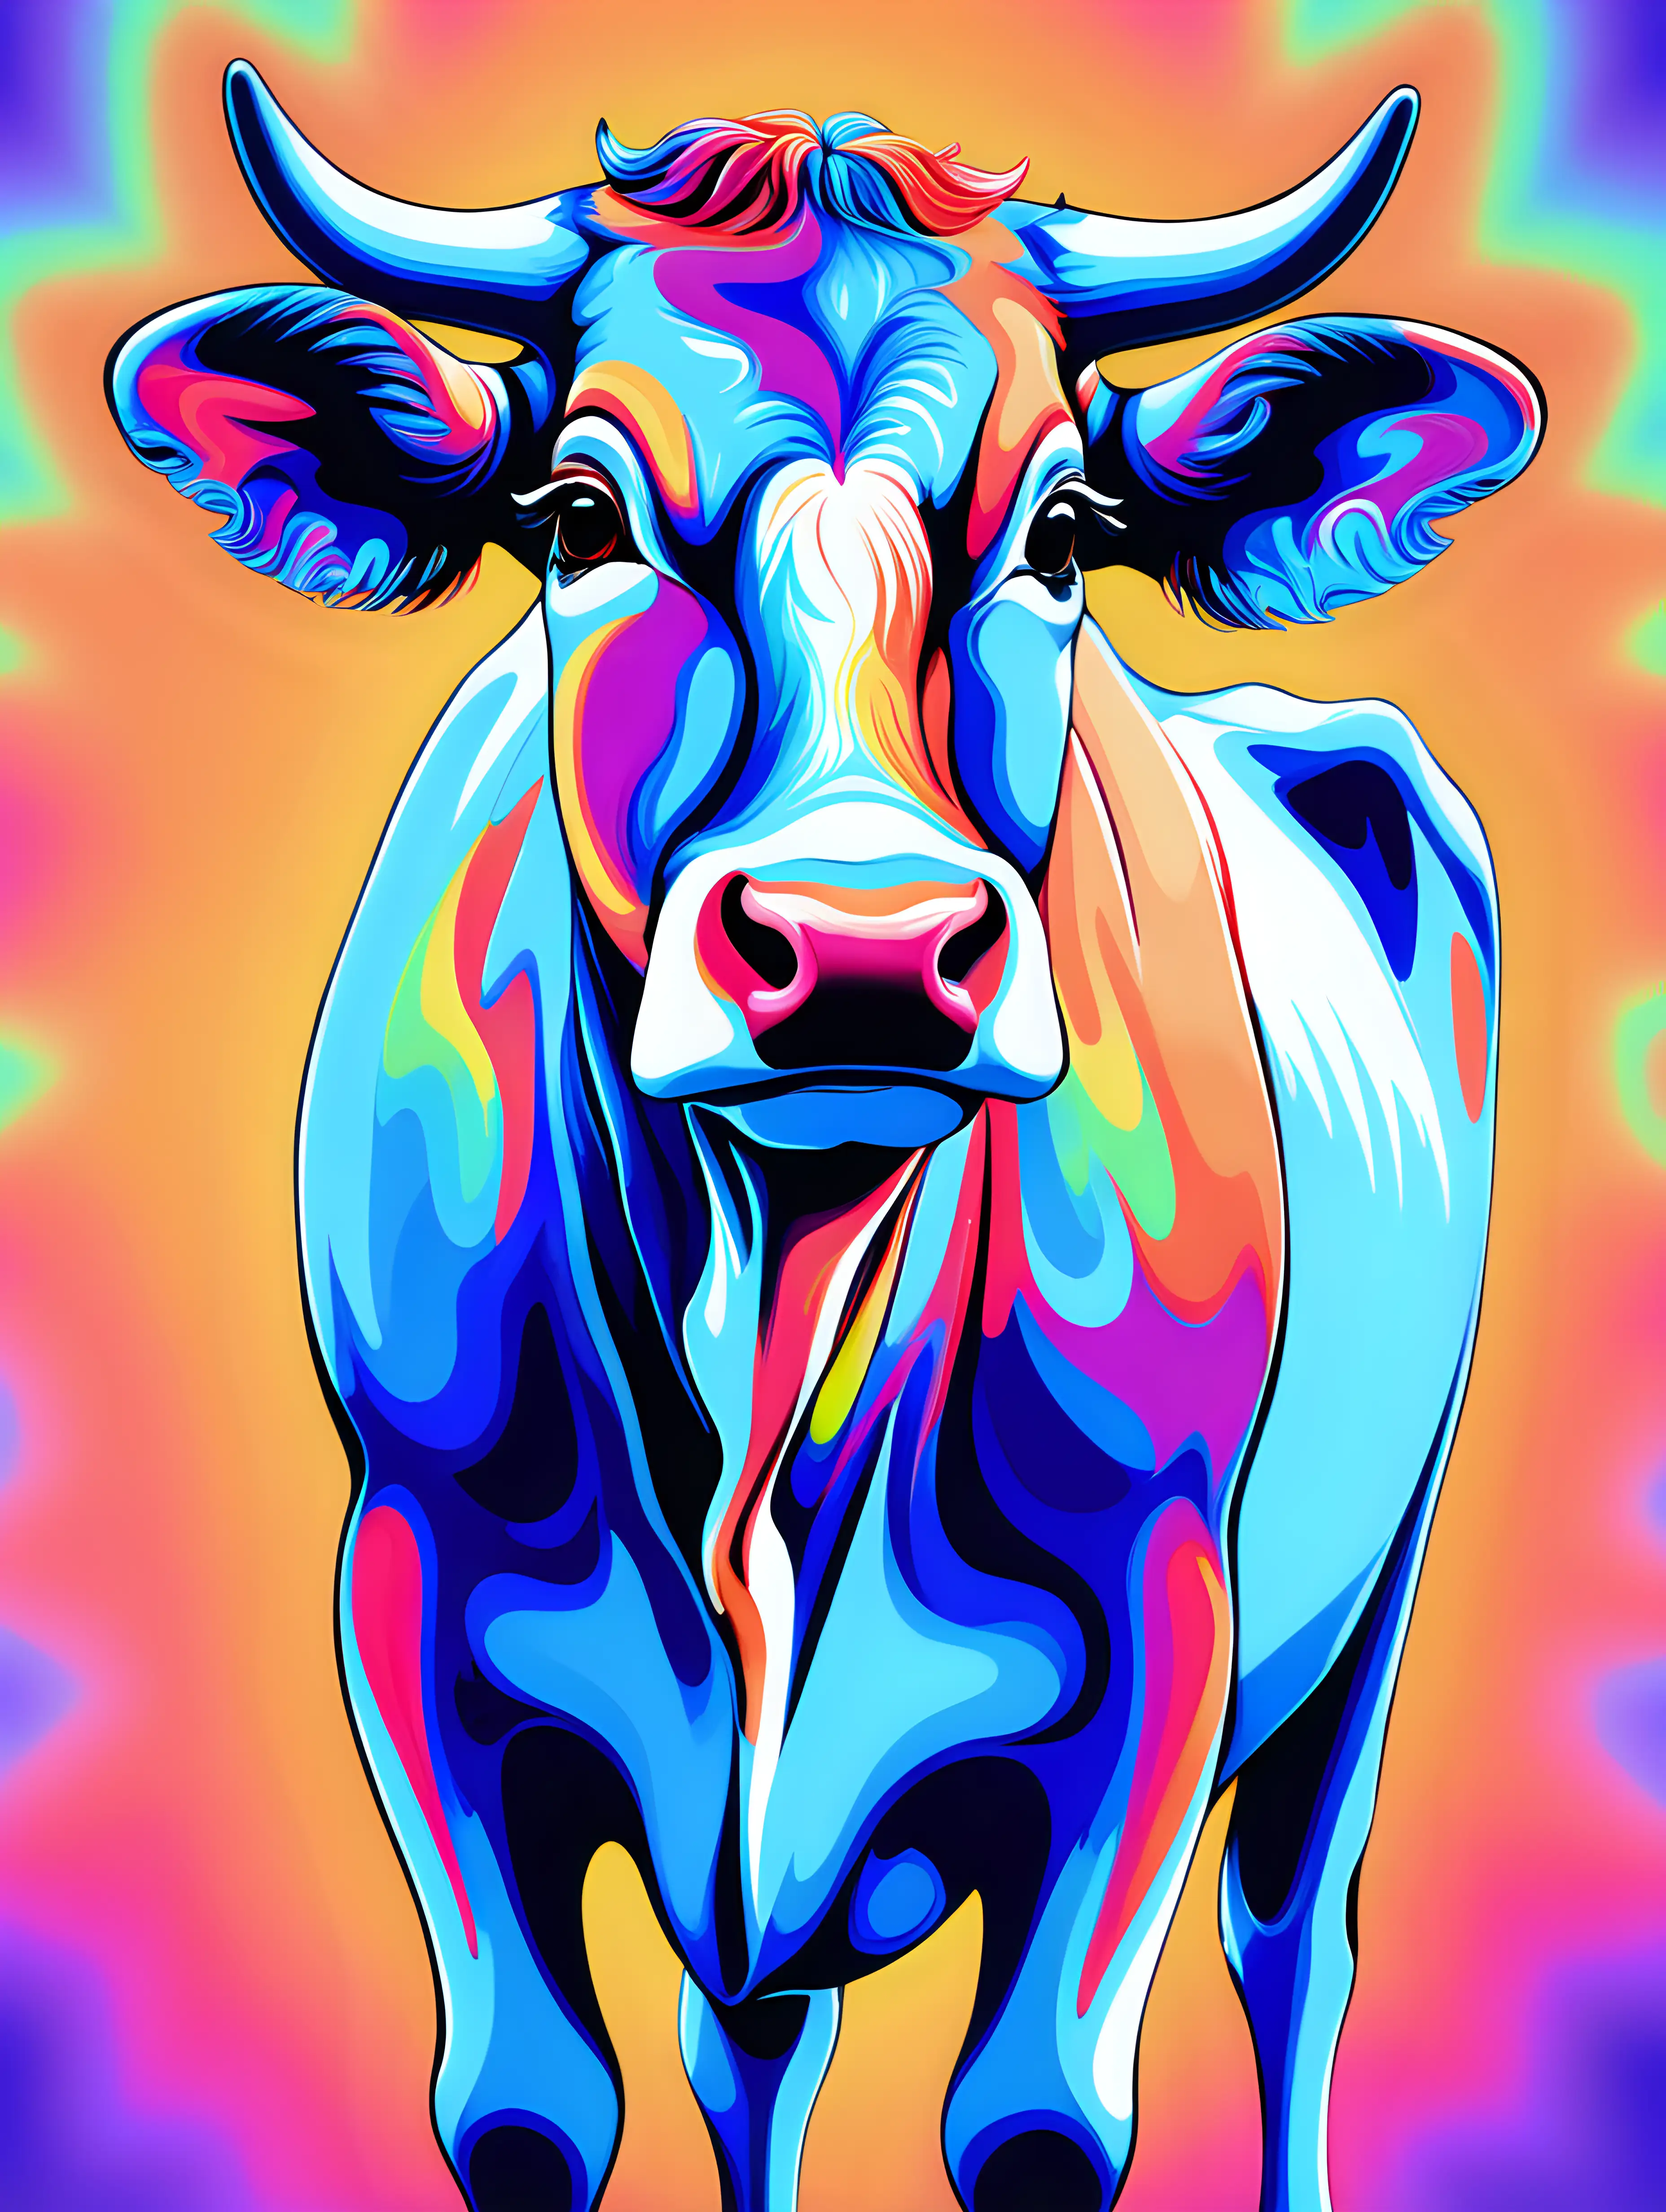 psychedelic image of a multicolored cow aquarella style